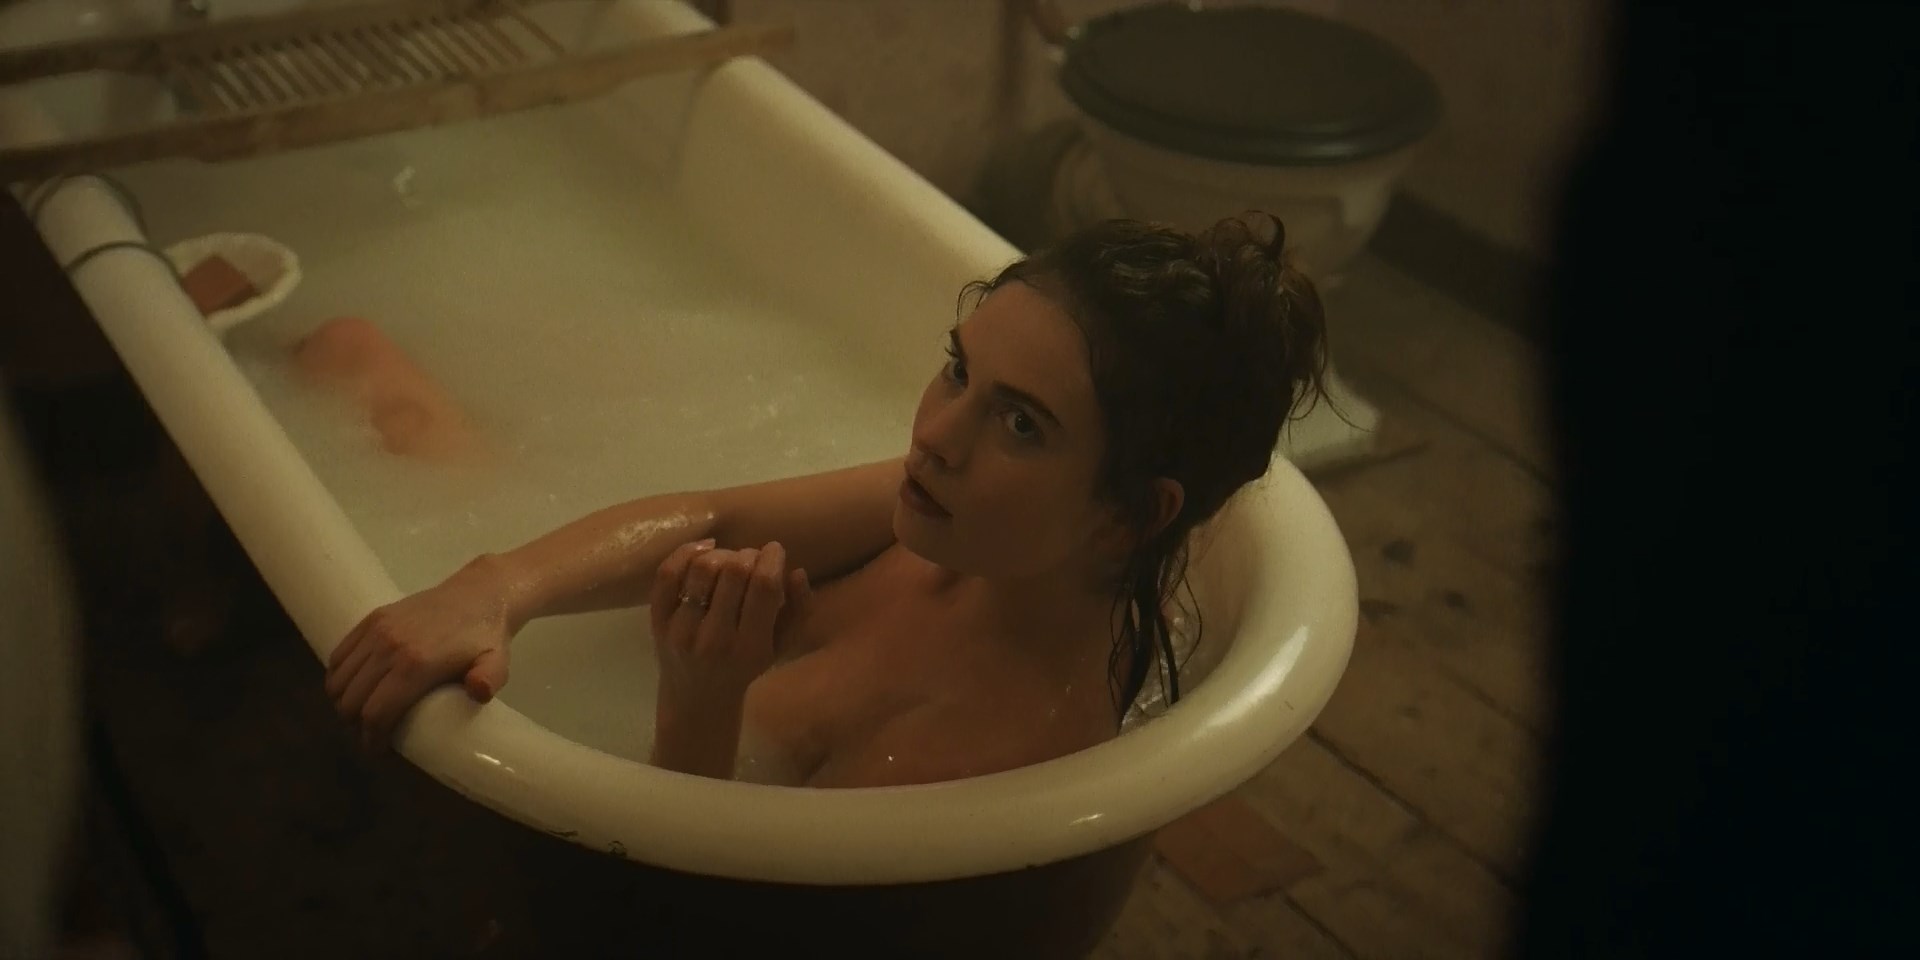 James nude lilly Lily James